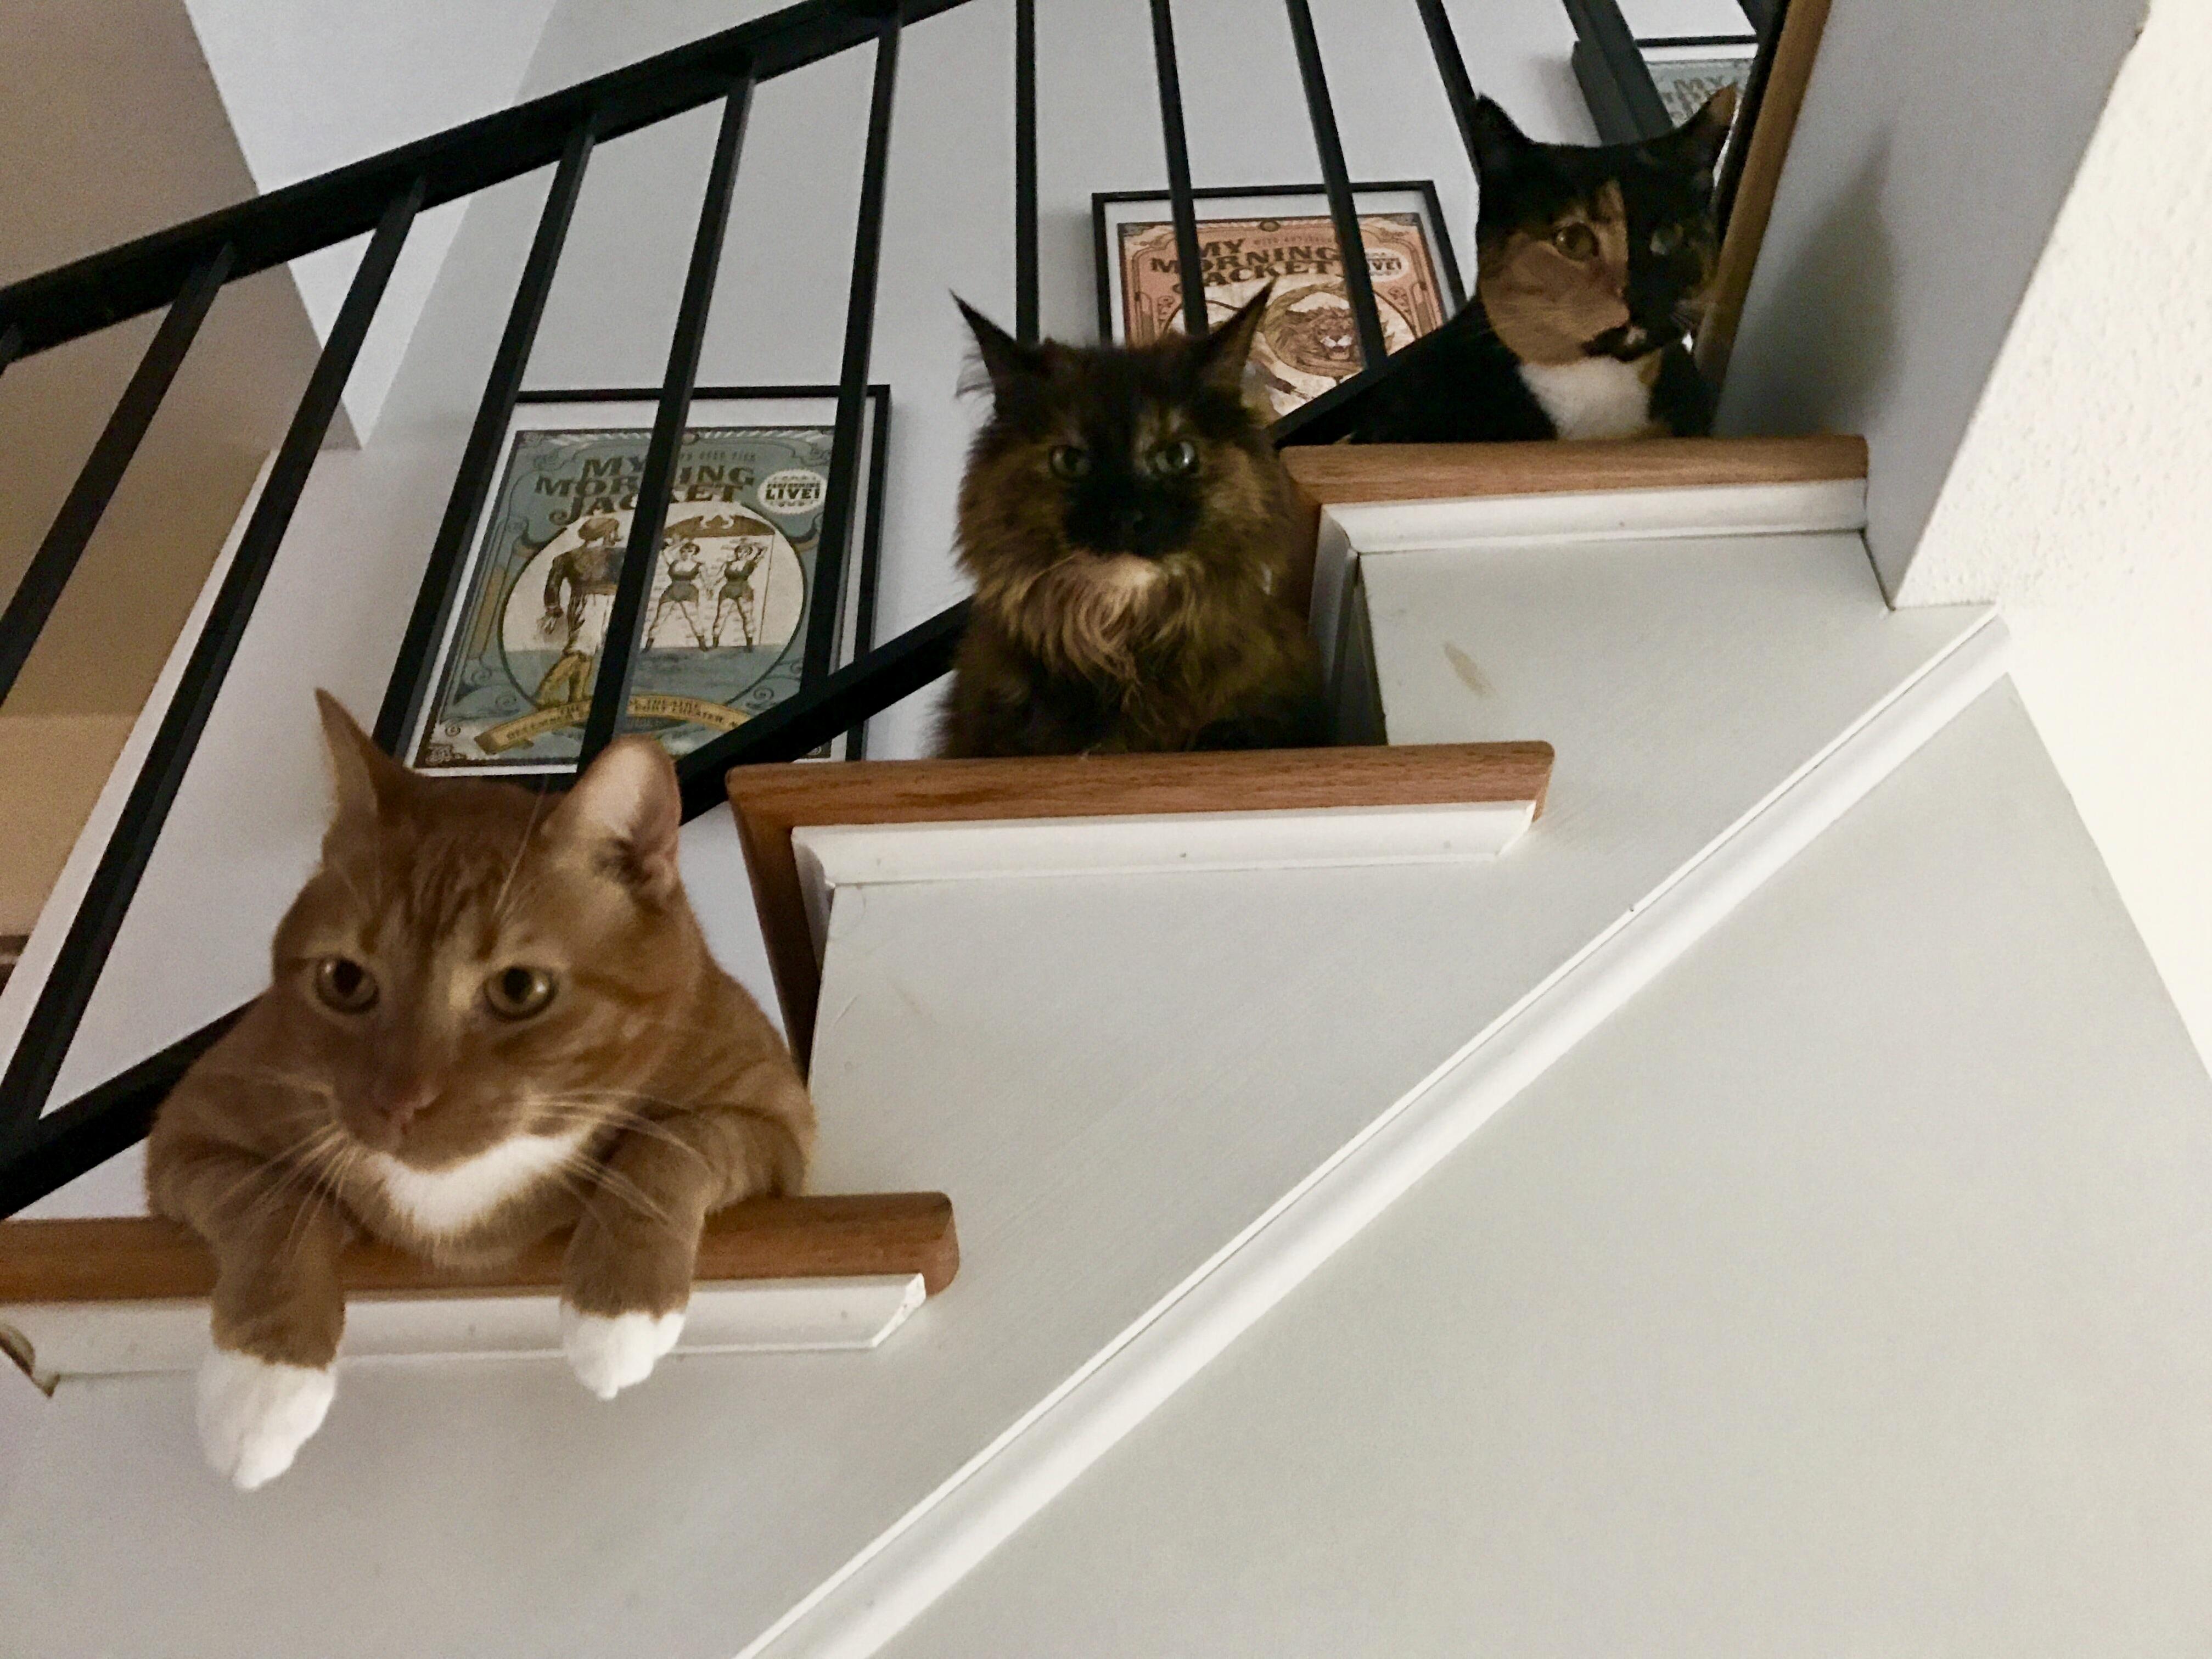 Sometimes you walk in the front door and its all cats